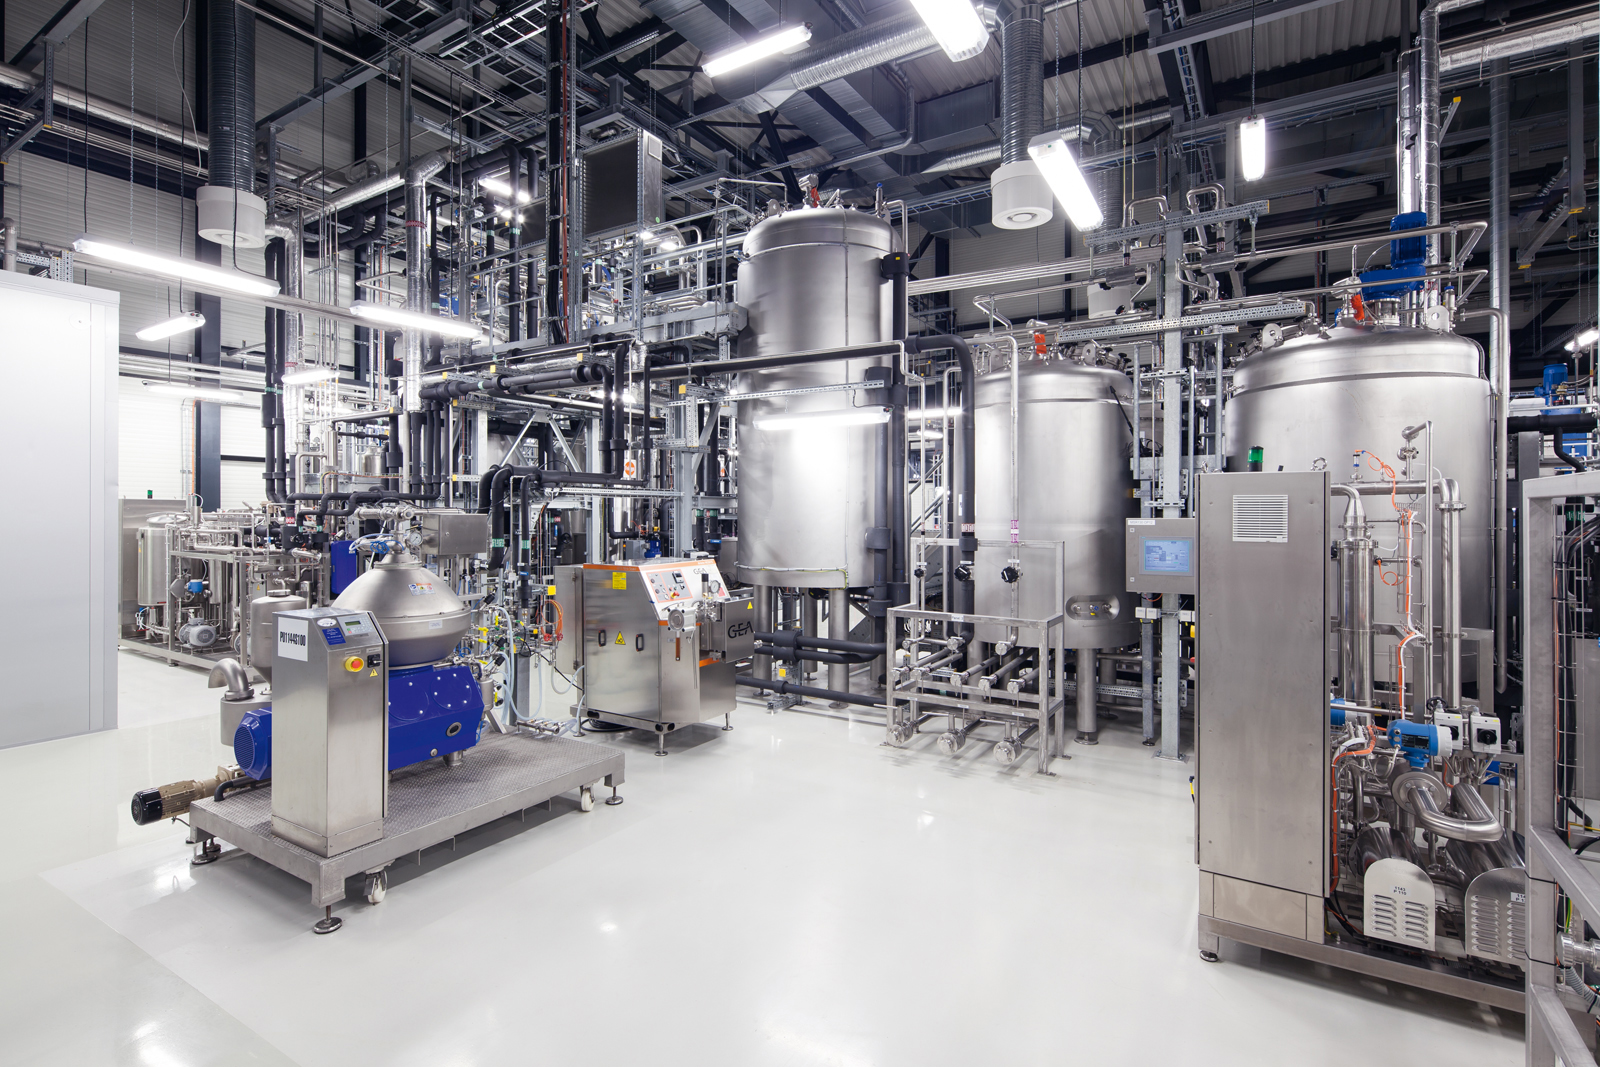 Pilot plant at the Fraunhofer Center for Chemical-Biotechnological Processes CBP